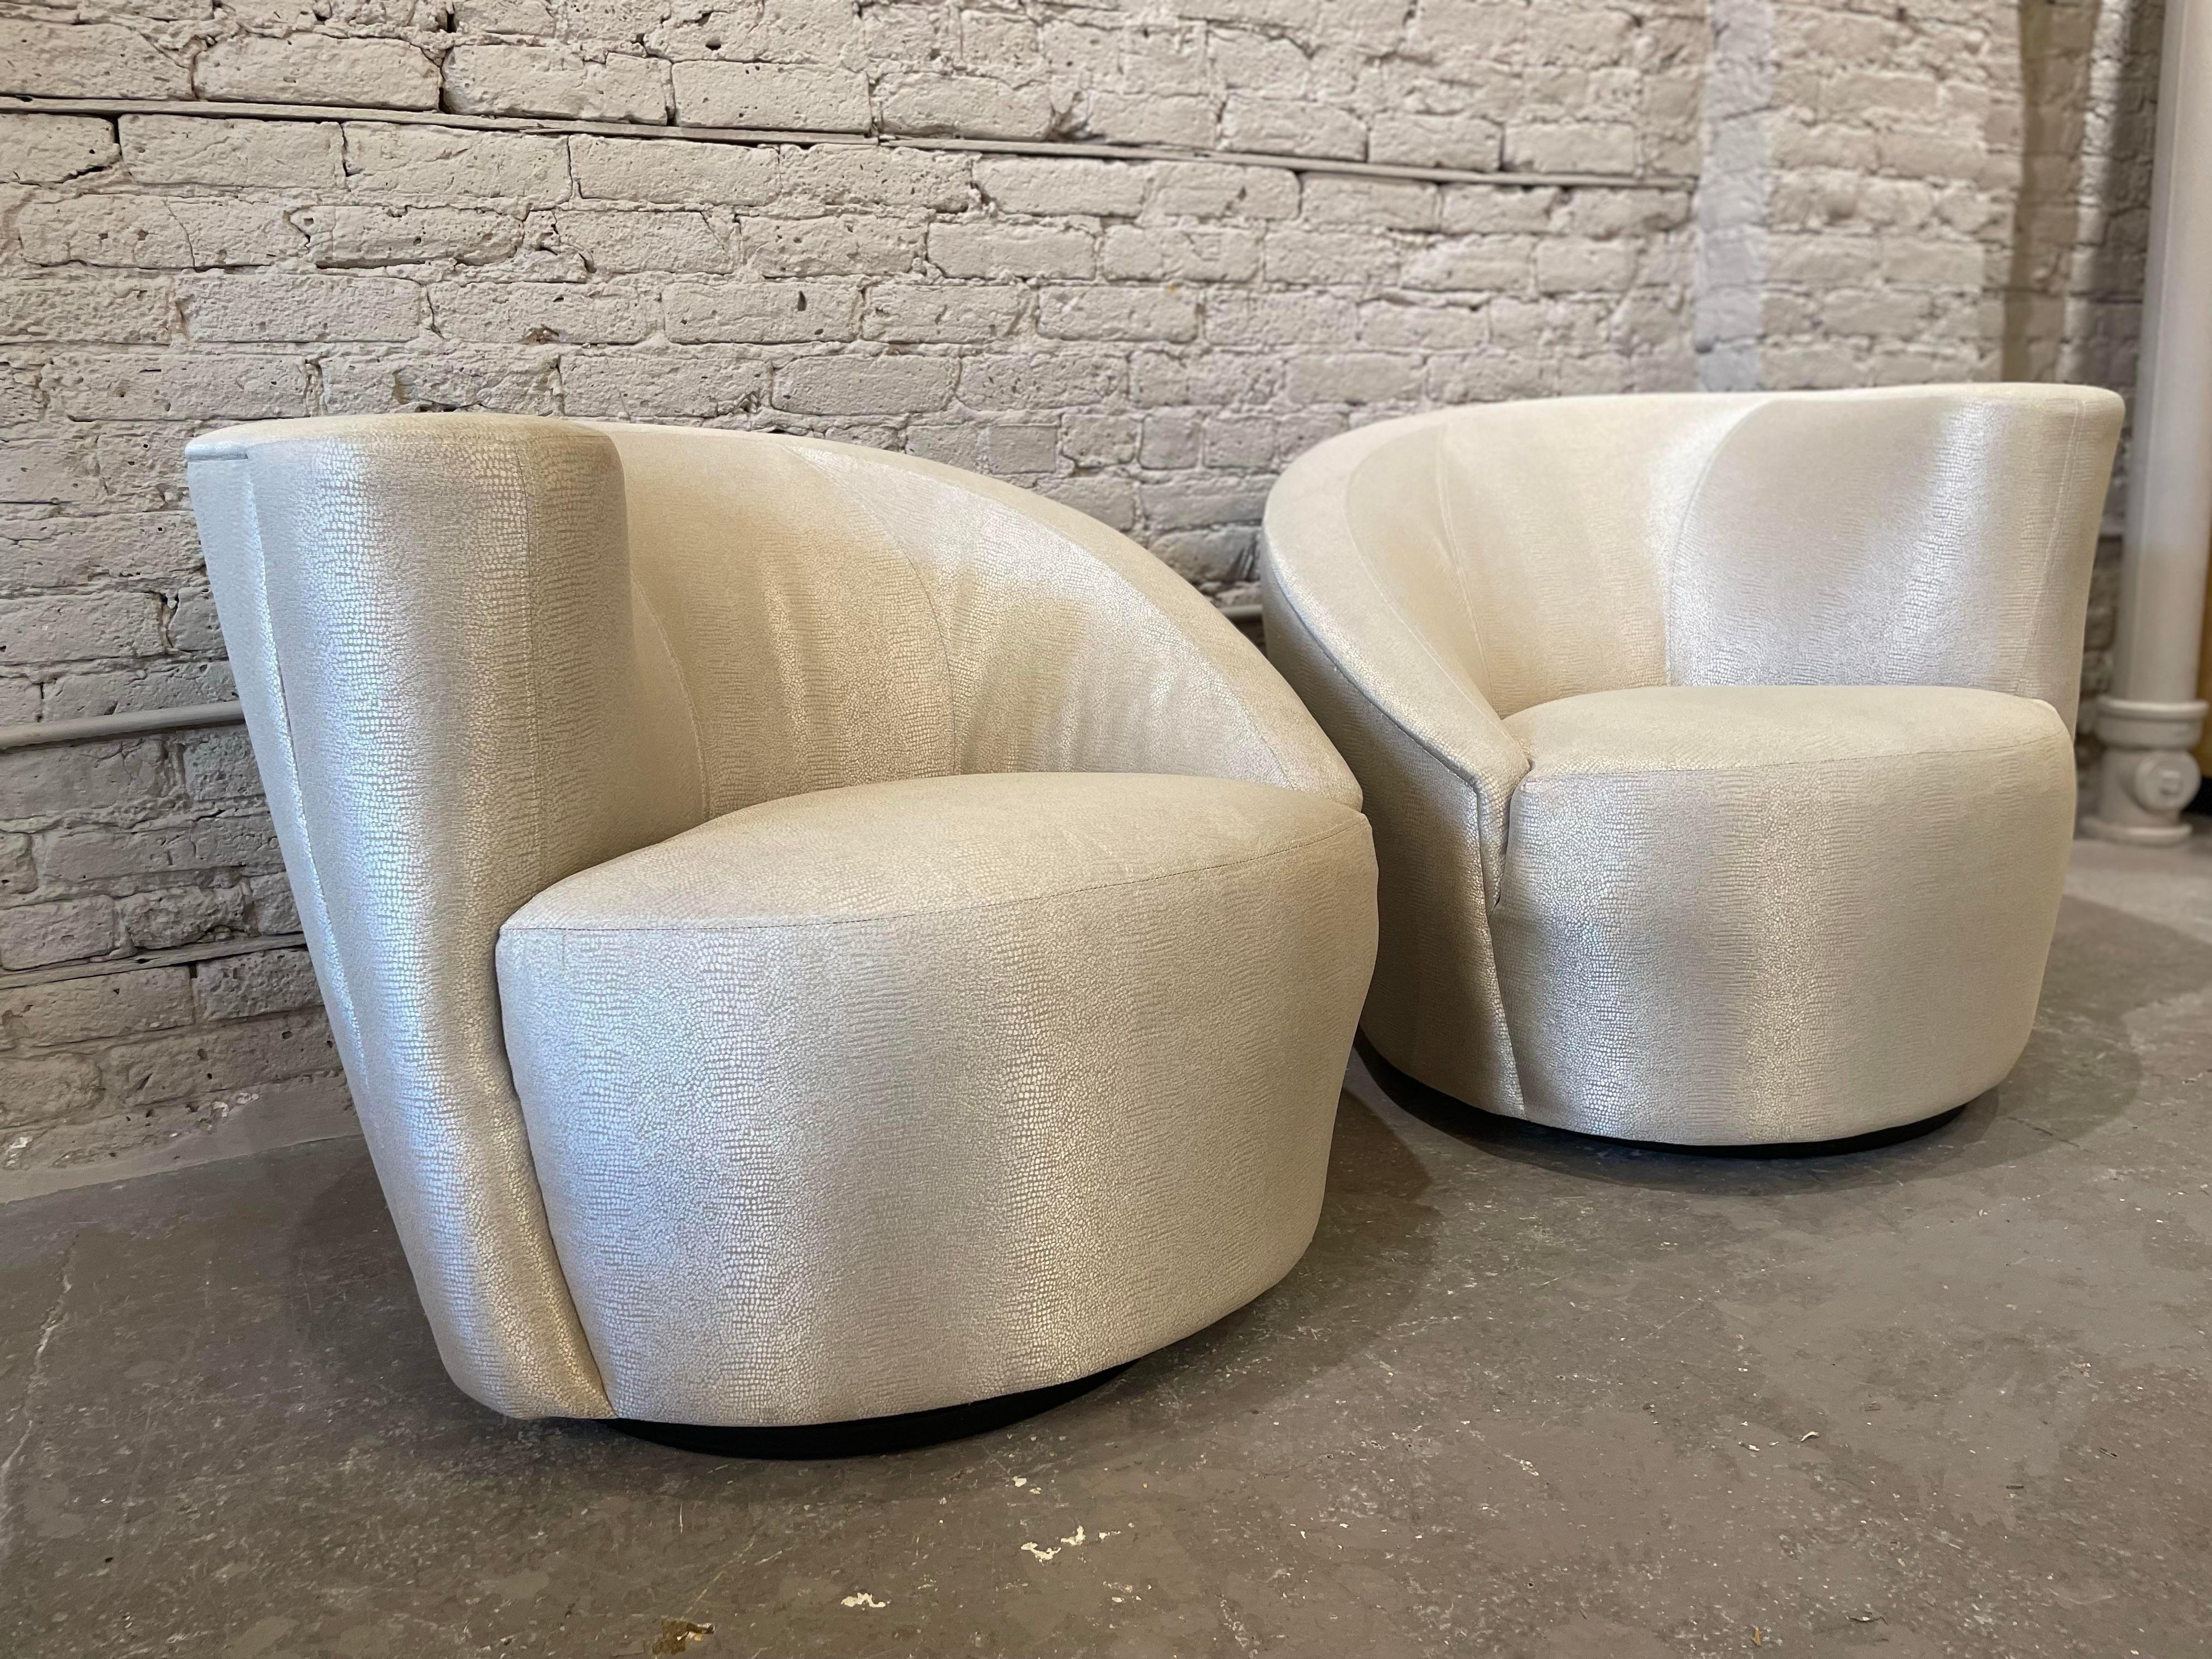 1970s Kagan Directional Nautilus Swivel Chairs Vintage - a Pair For Sale 2